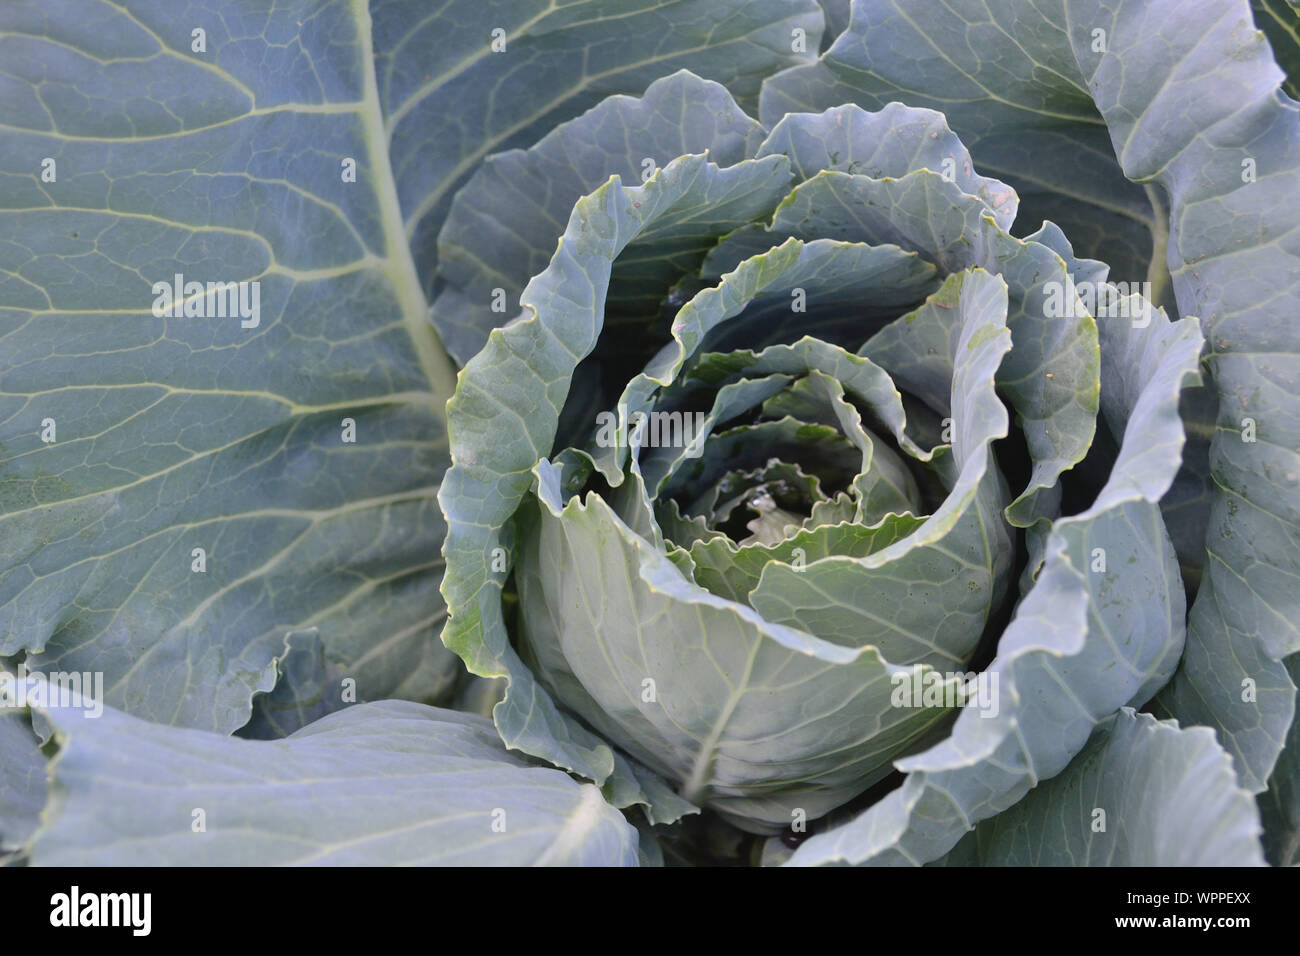 Green cabbage growing in a field, close up Stock Photo